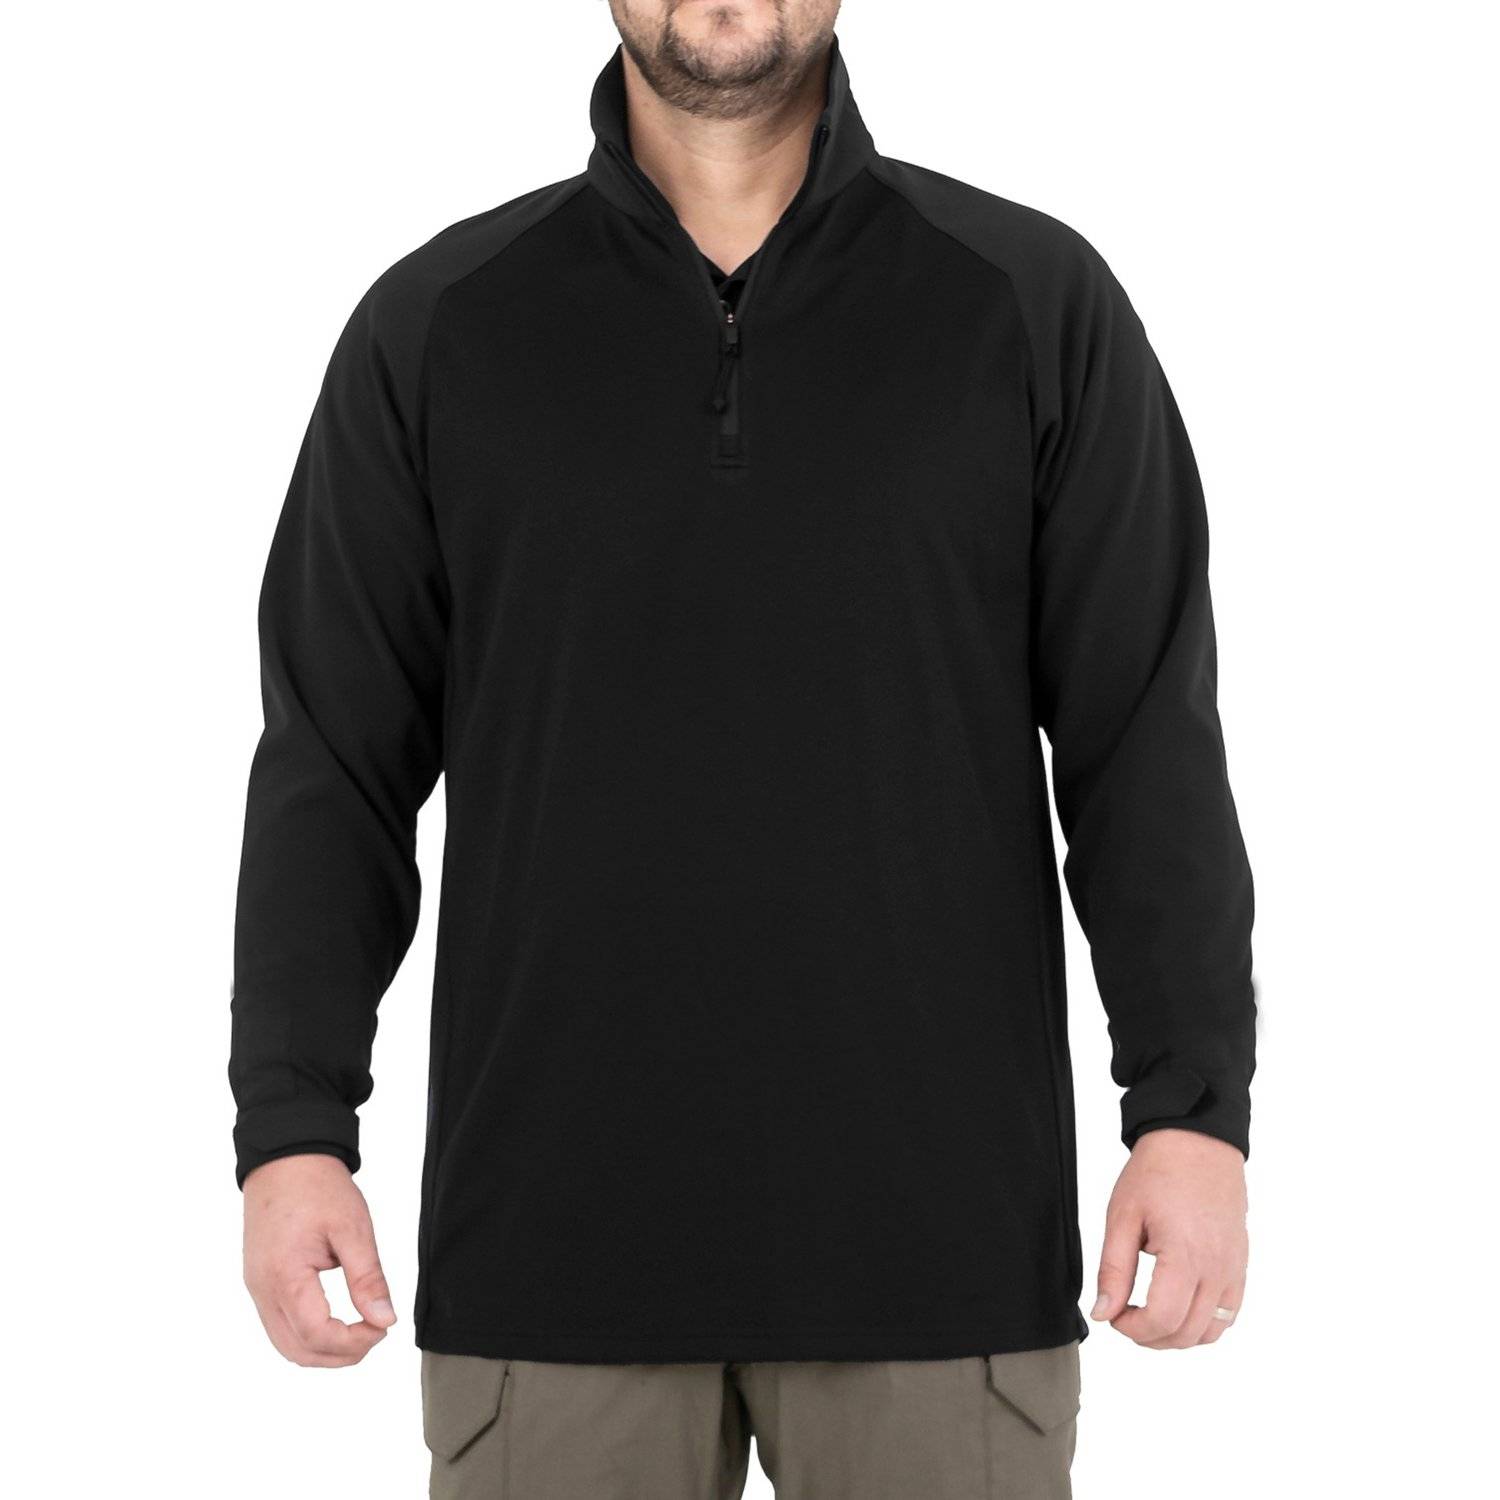 FIRST TACTICAL MEN'S PRO DUTY PULLOVER